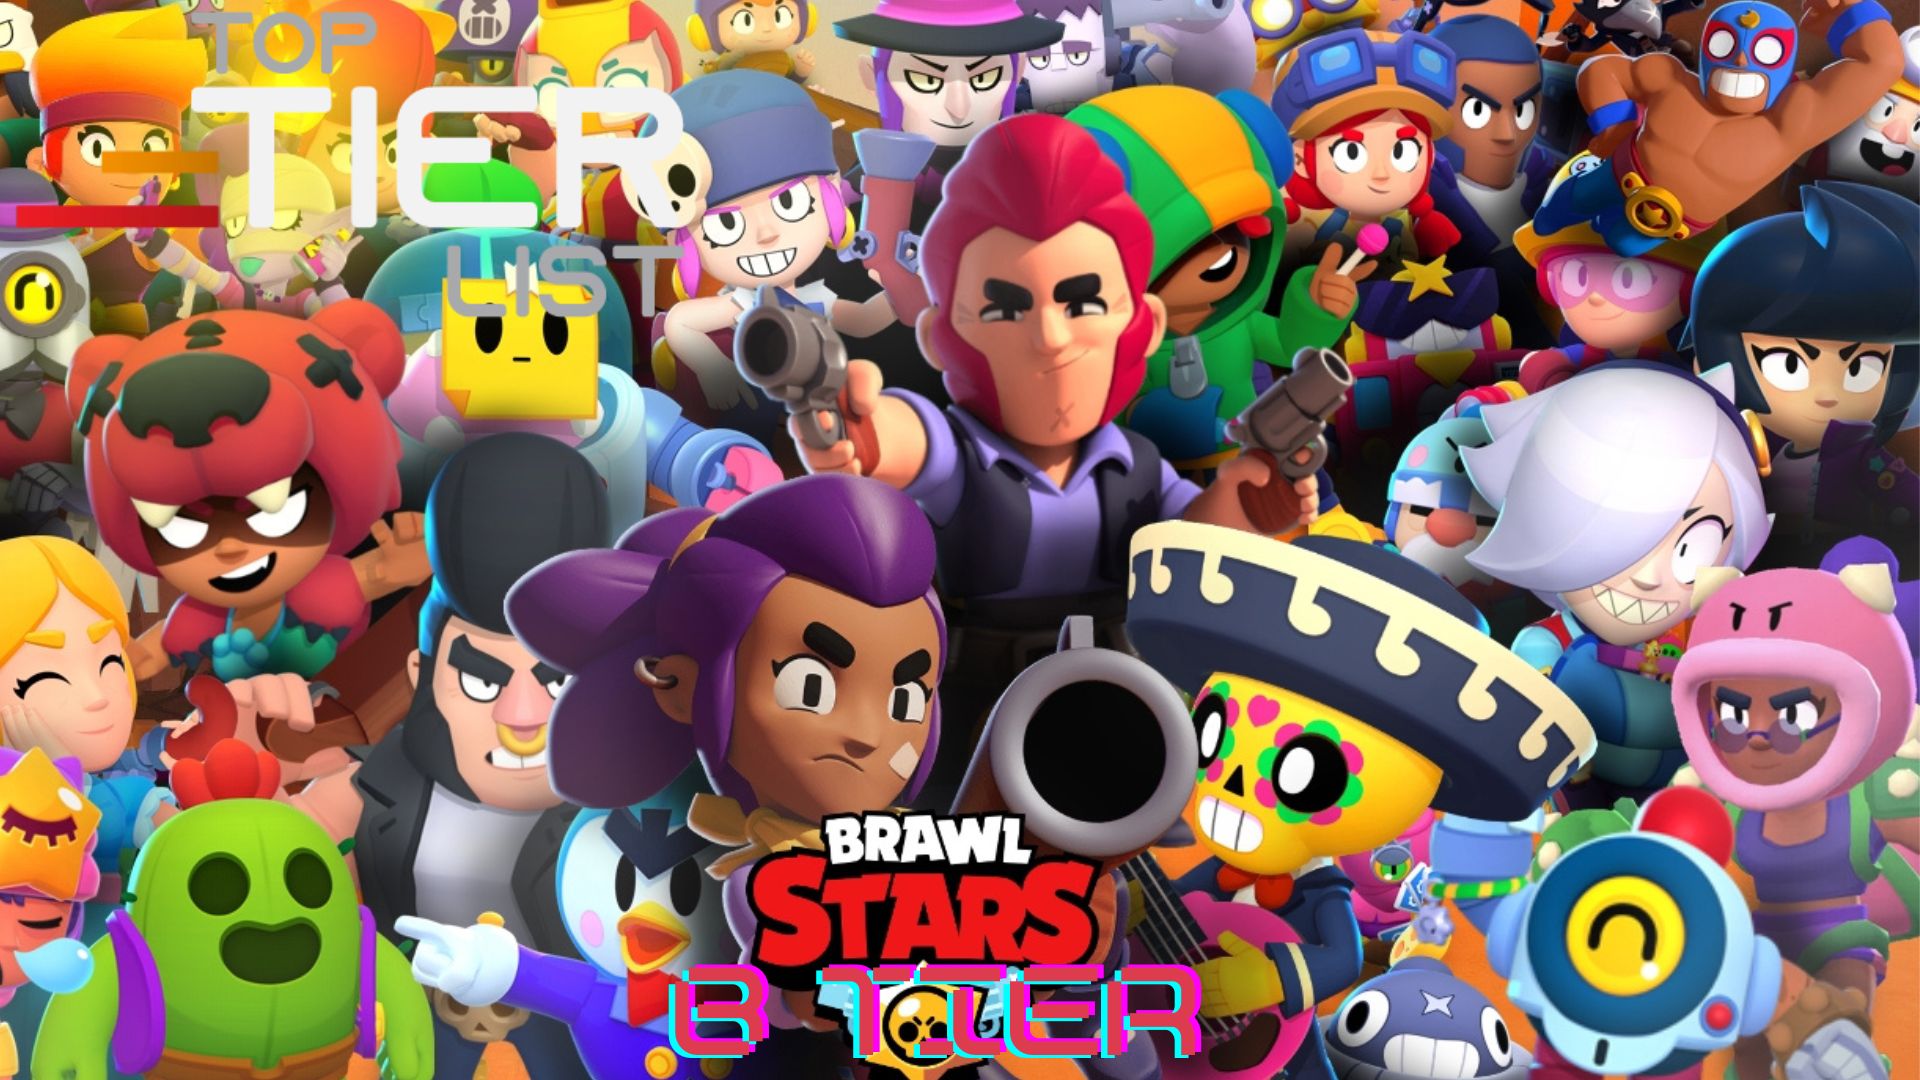 Average brawlers of the game